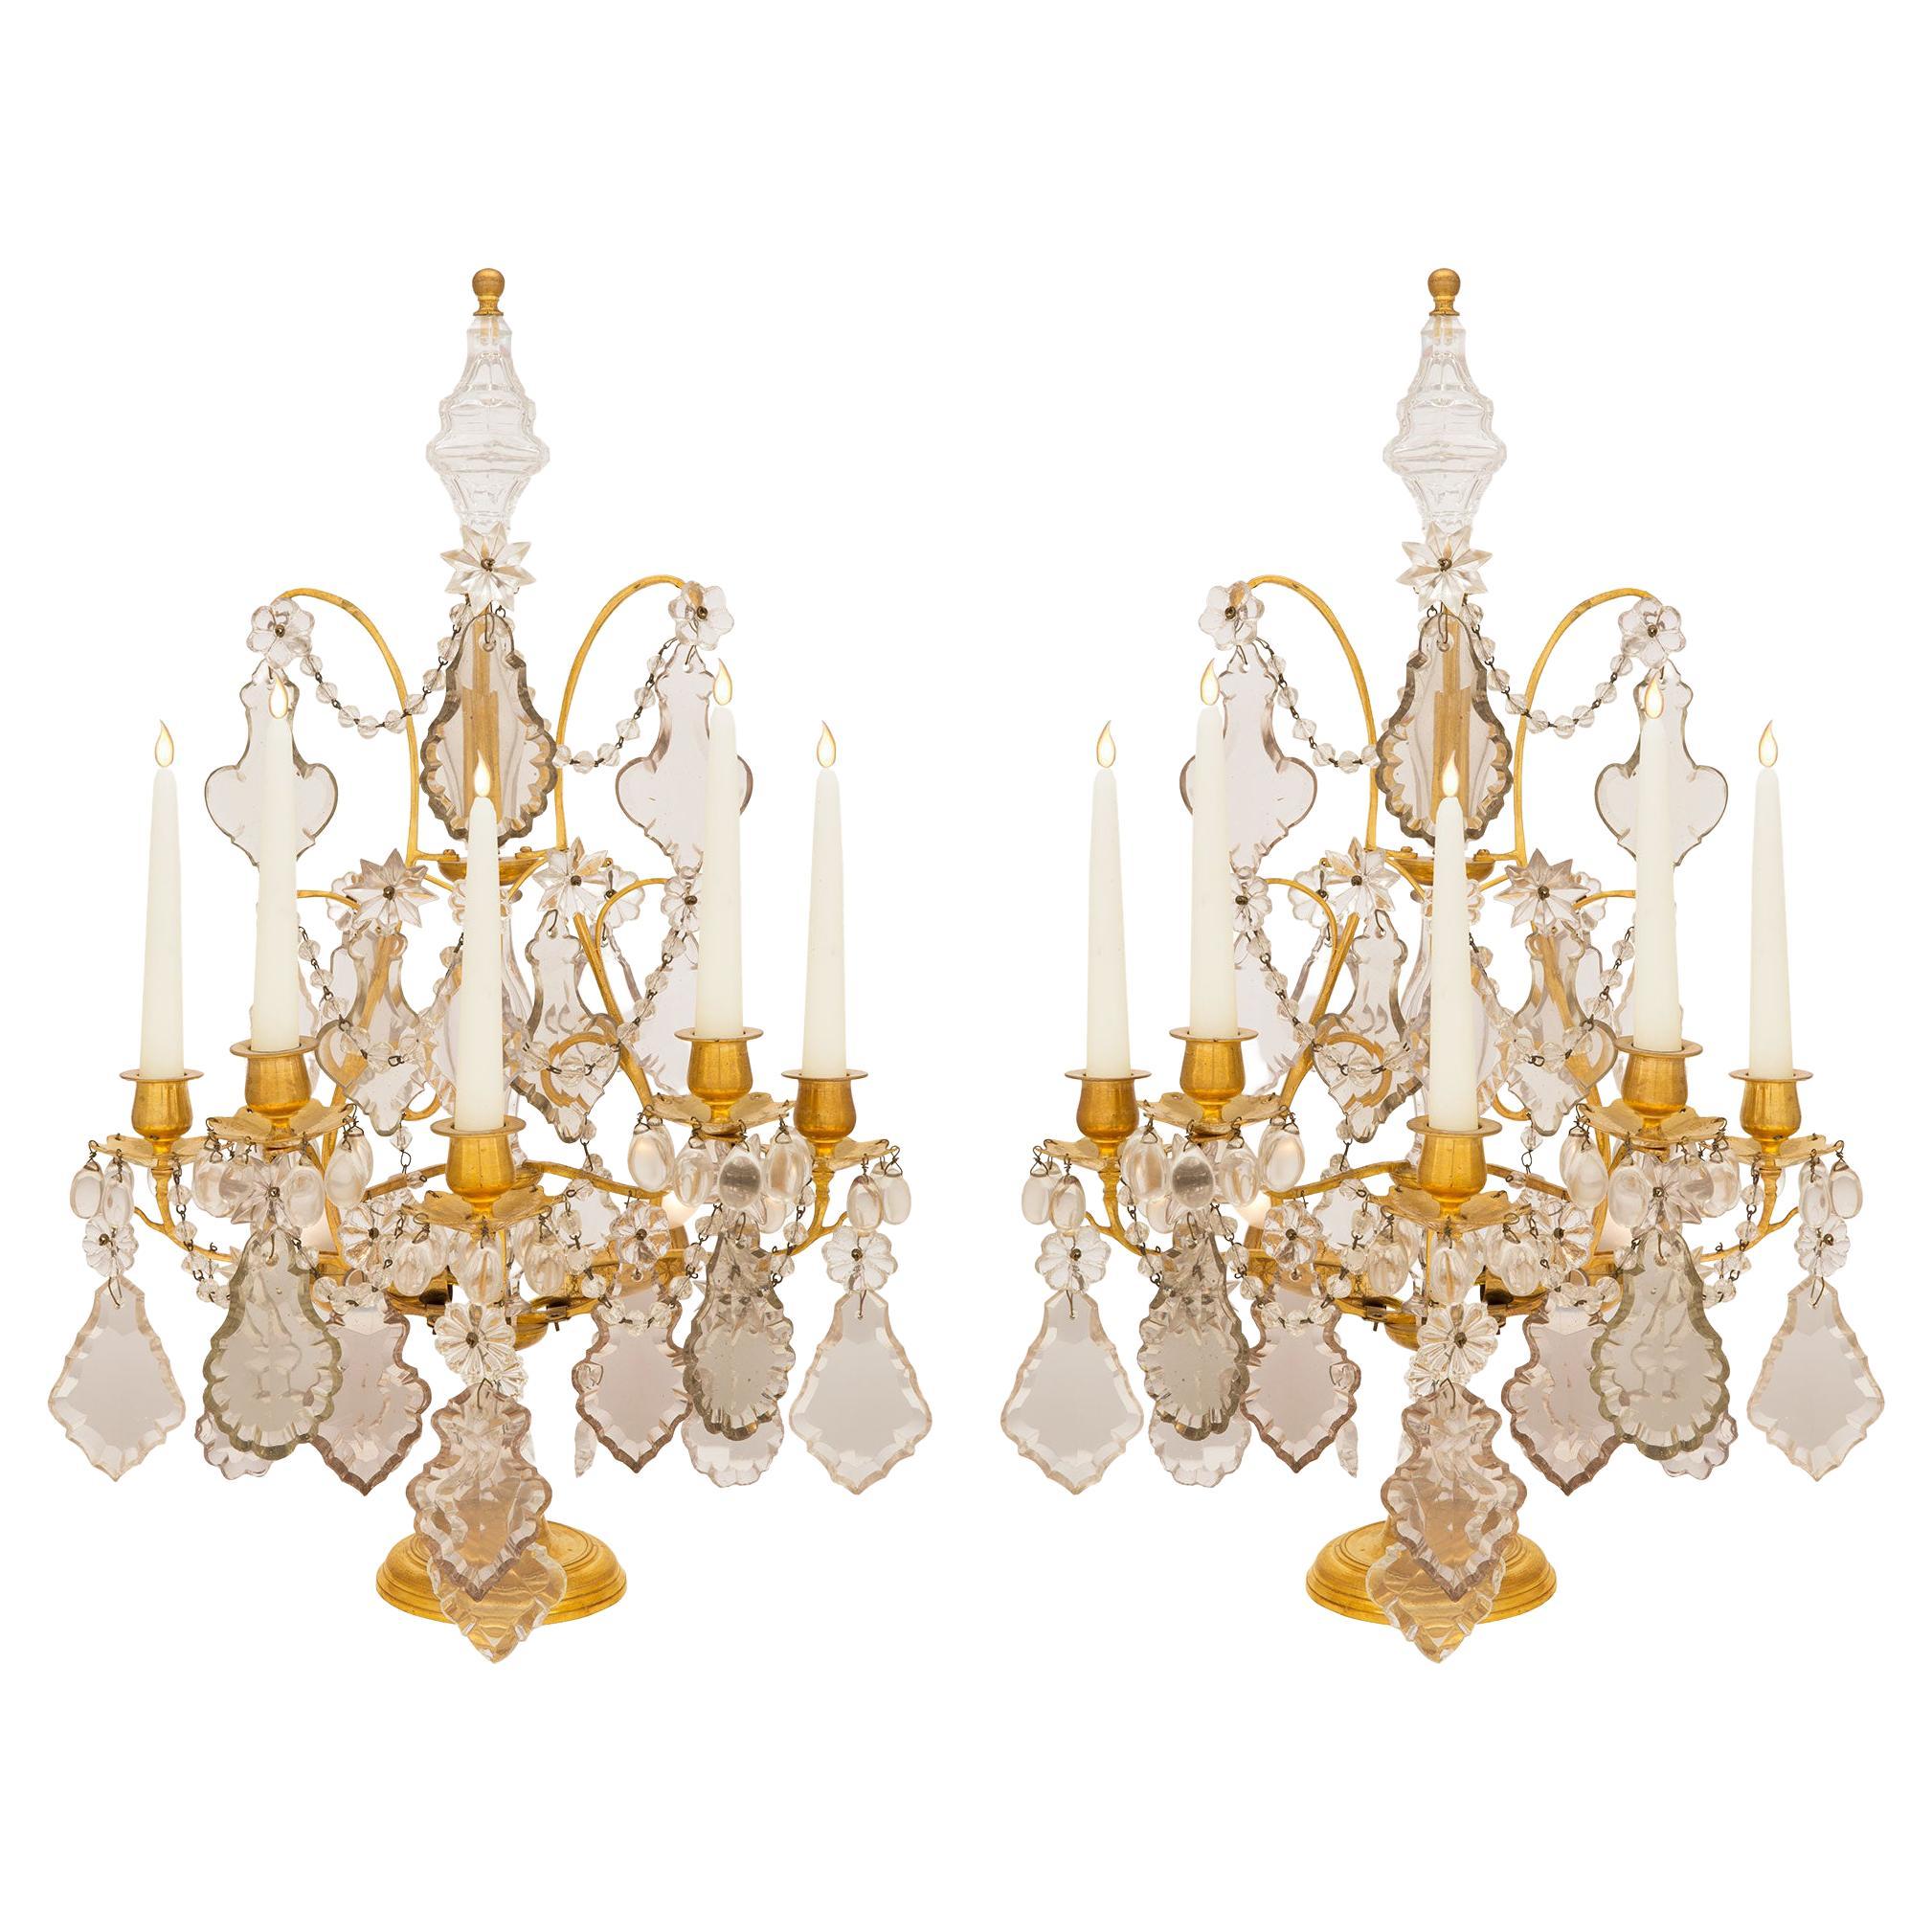 Pair of French 19th Century Louis XV Style Girandole Lamps For Sale